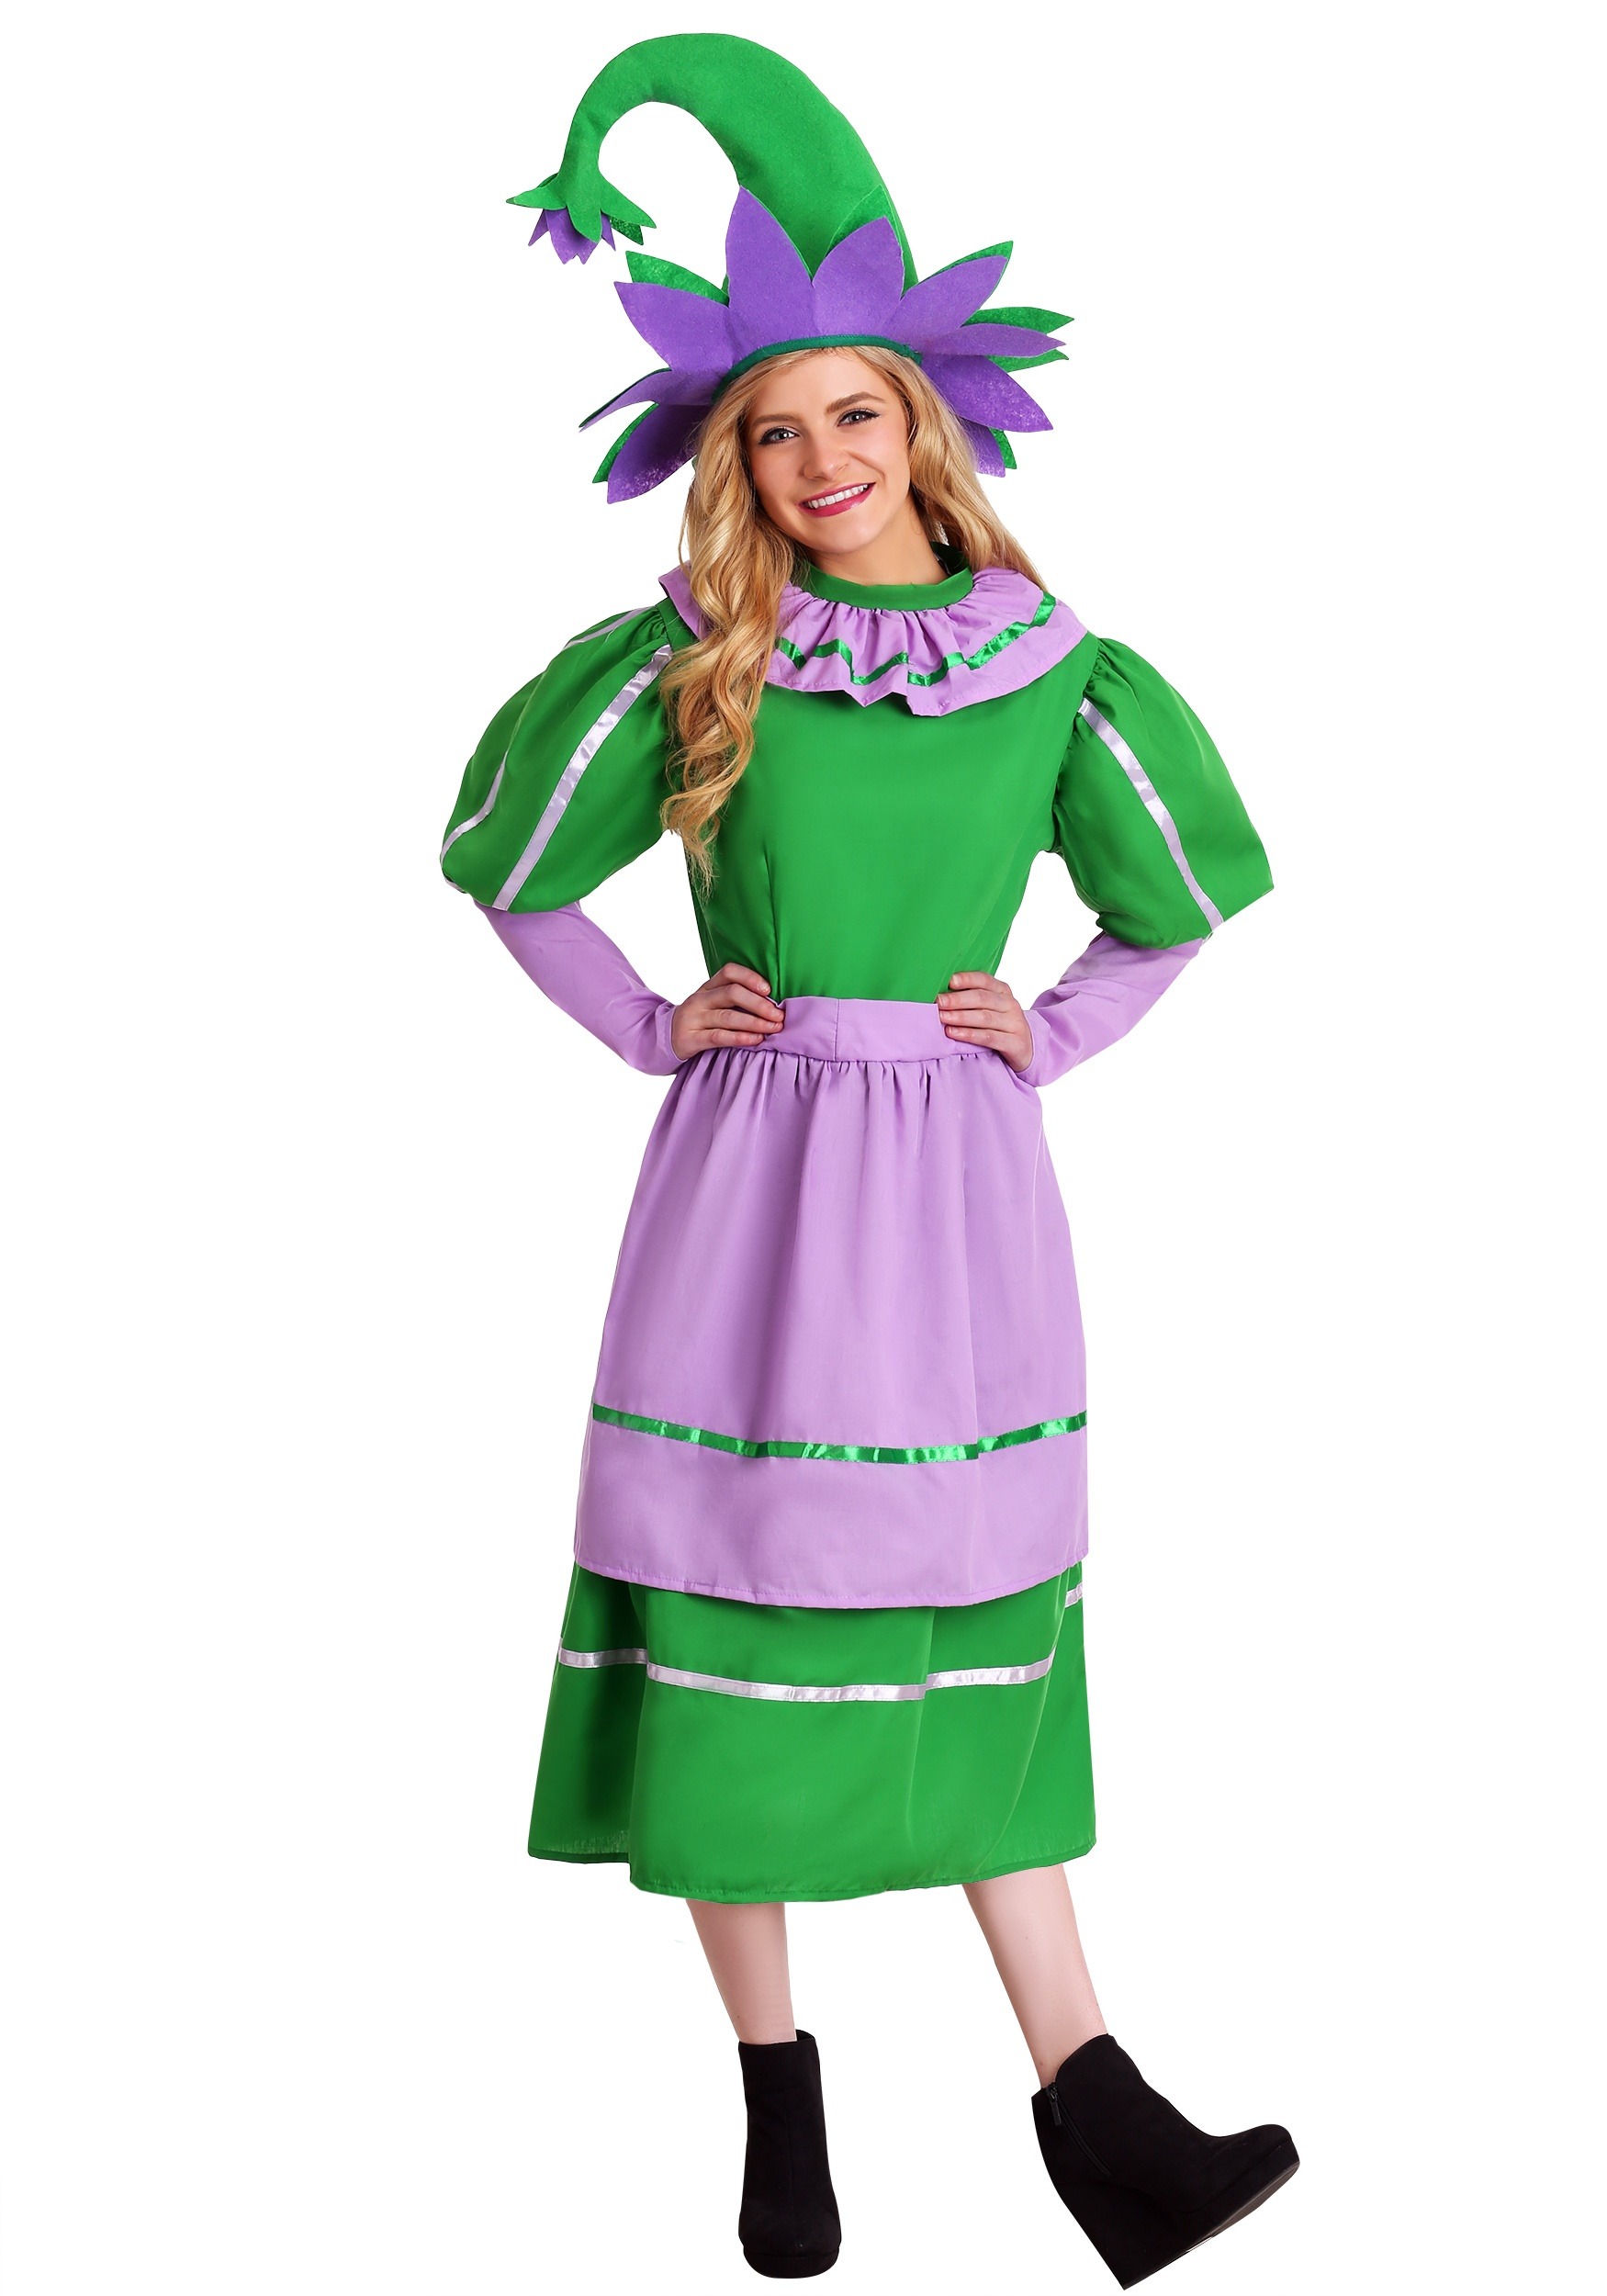 Munchkin Girl Costume For Adults